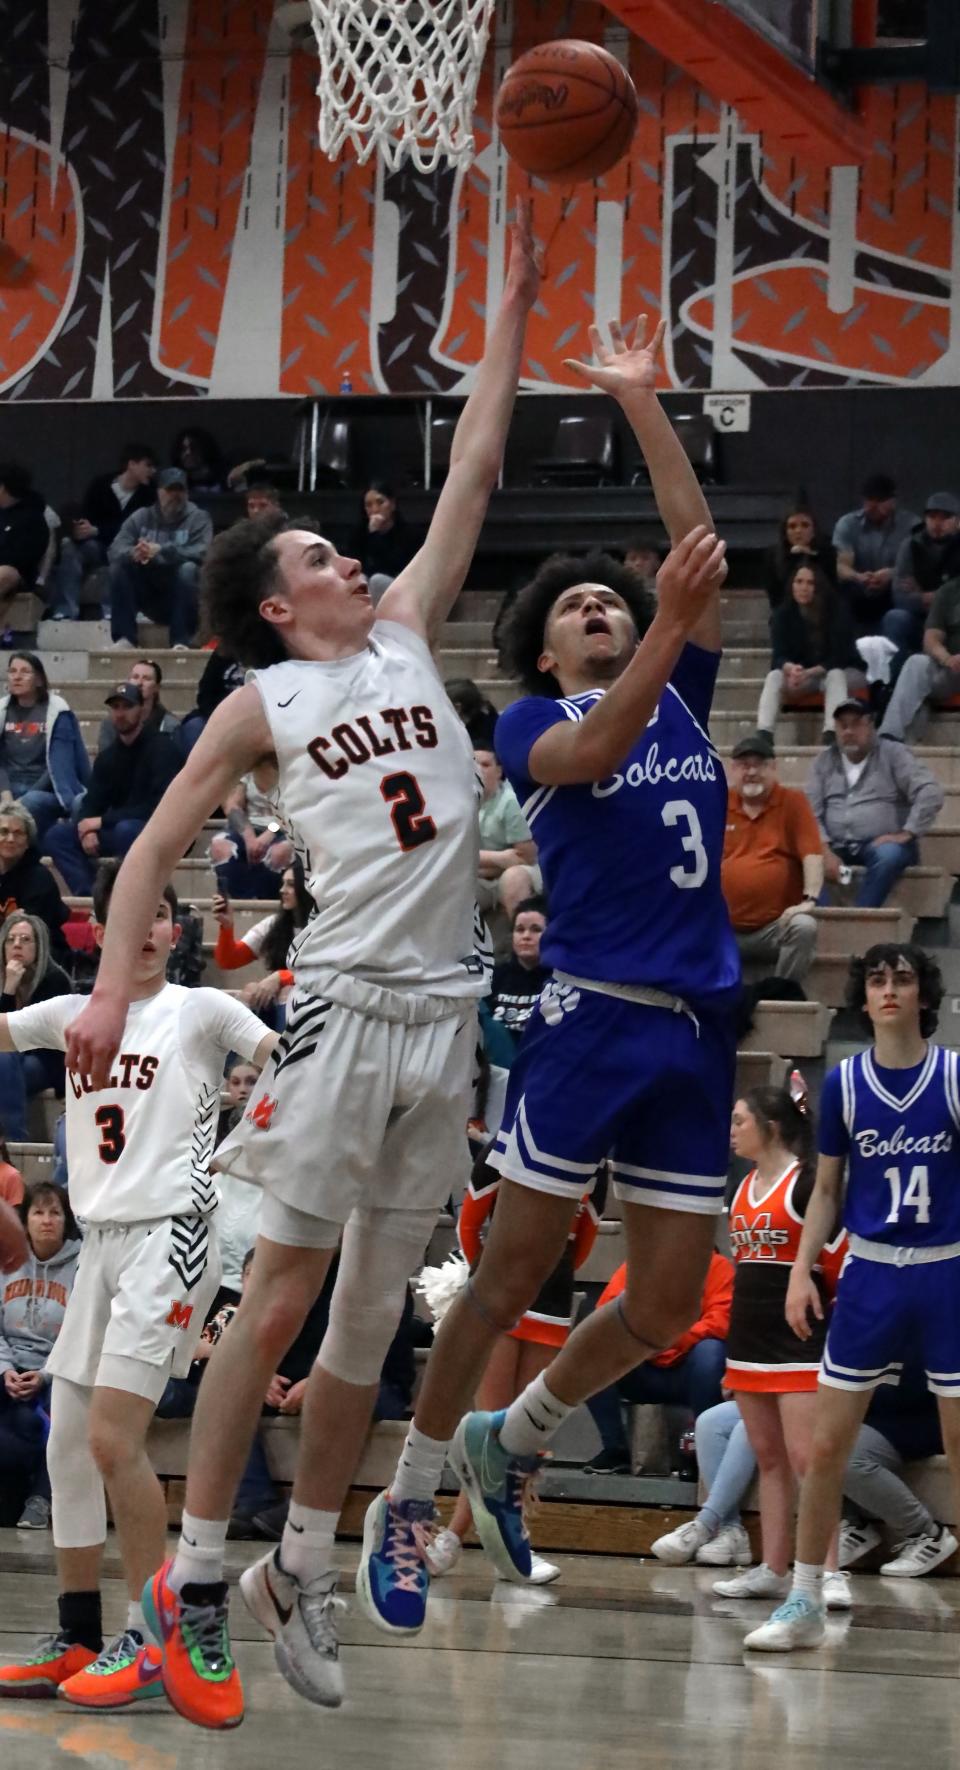 Cambridge's Jesiah Barnett (3) puts up a shot over Meadowbrook's Masyn Campbell (2) during the Colts versus Bobcats basketball game Tuesday evening at Meadowbrook High School.